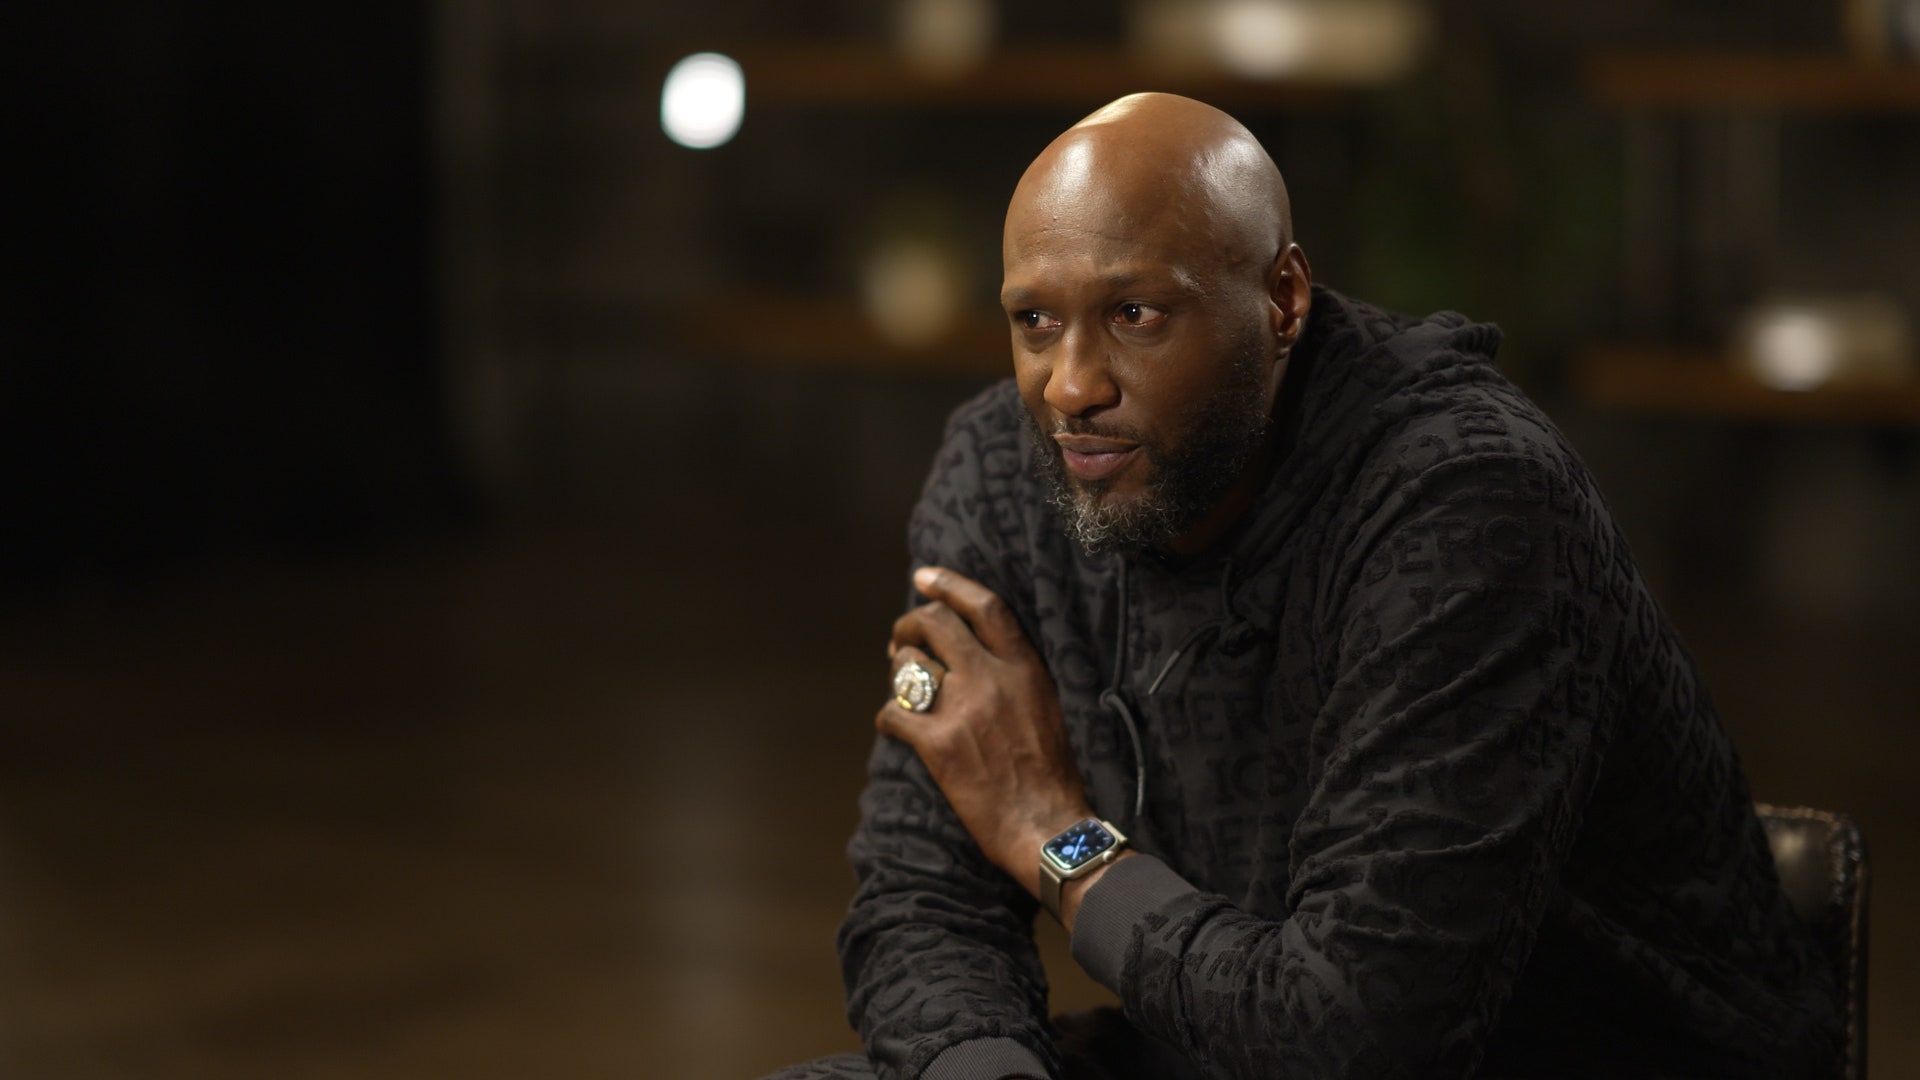 What to know about Lamar Odom ahead of the Fox special 'TMZ Presents: Lamar Odom: Sex, Drugs and Kardashians'